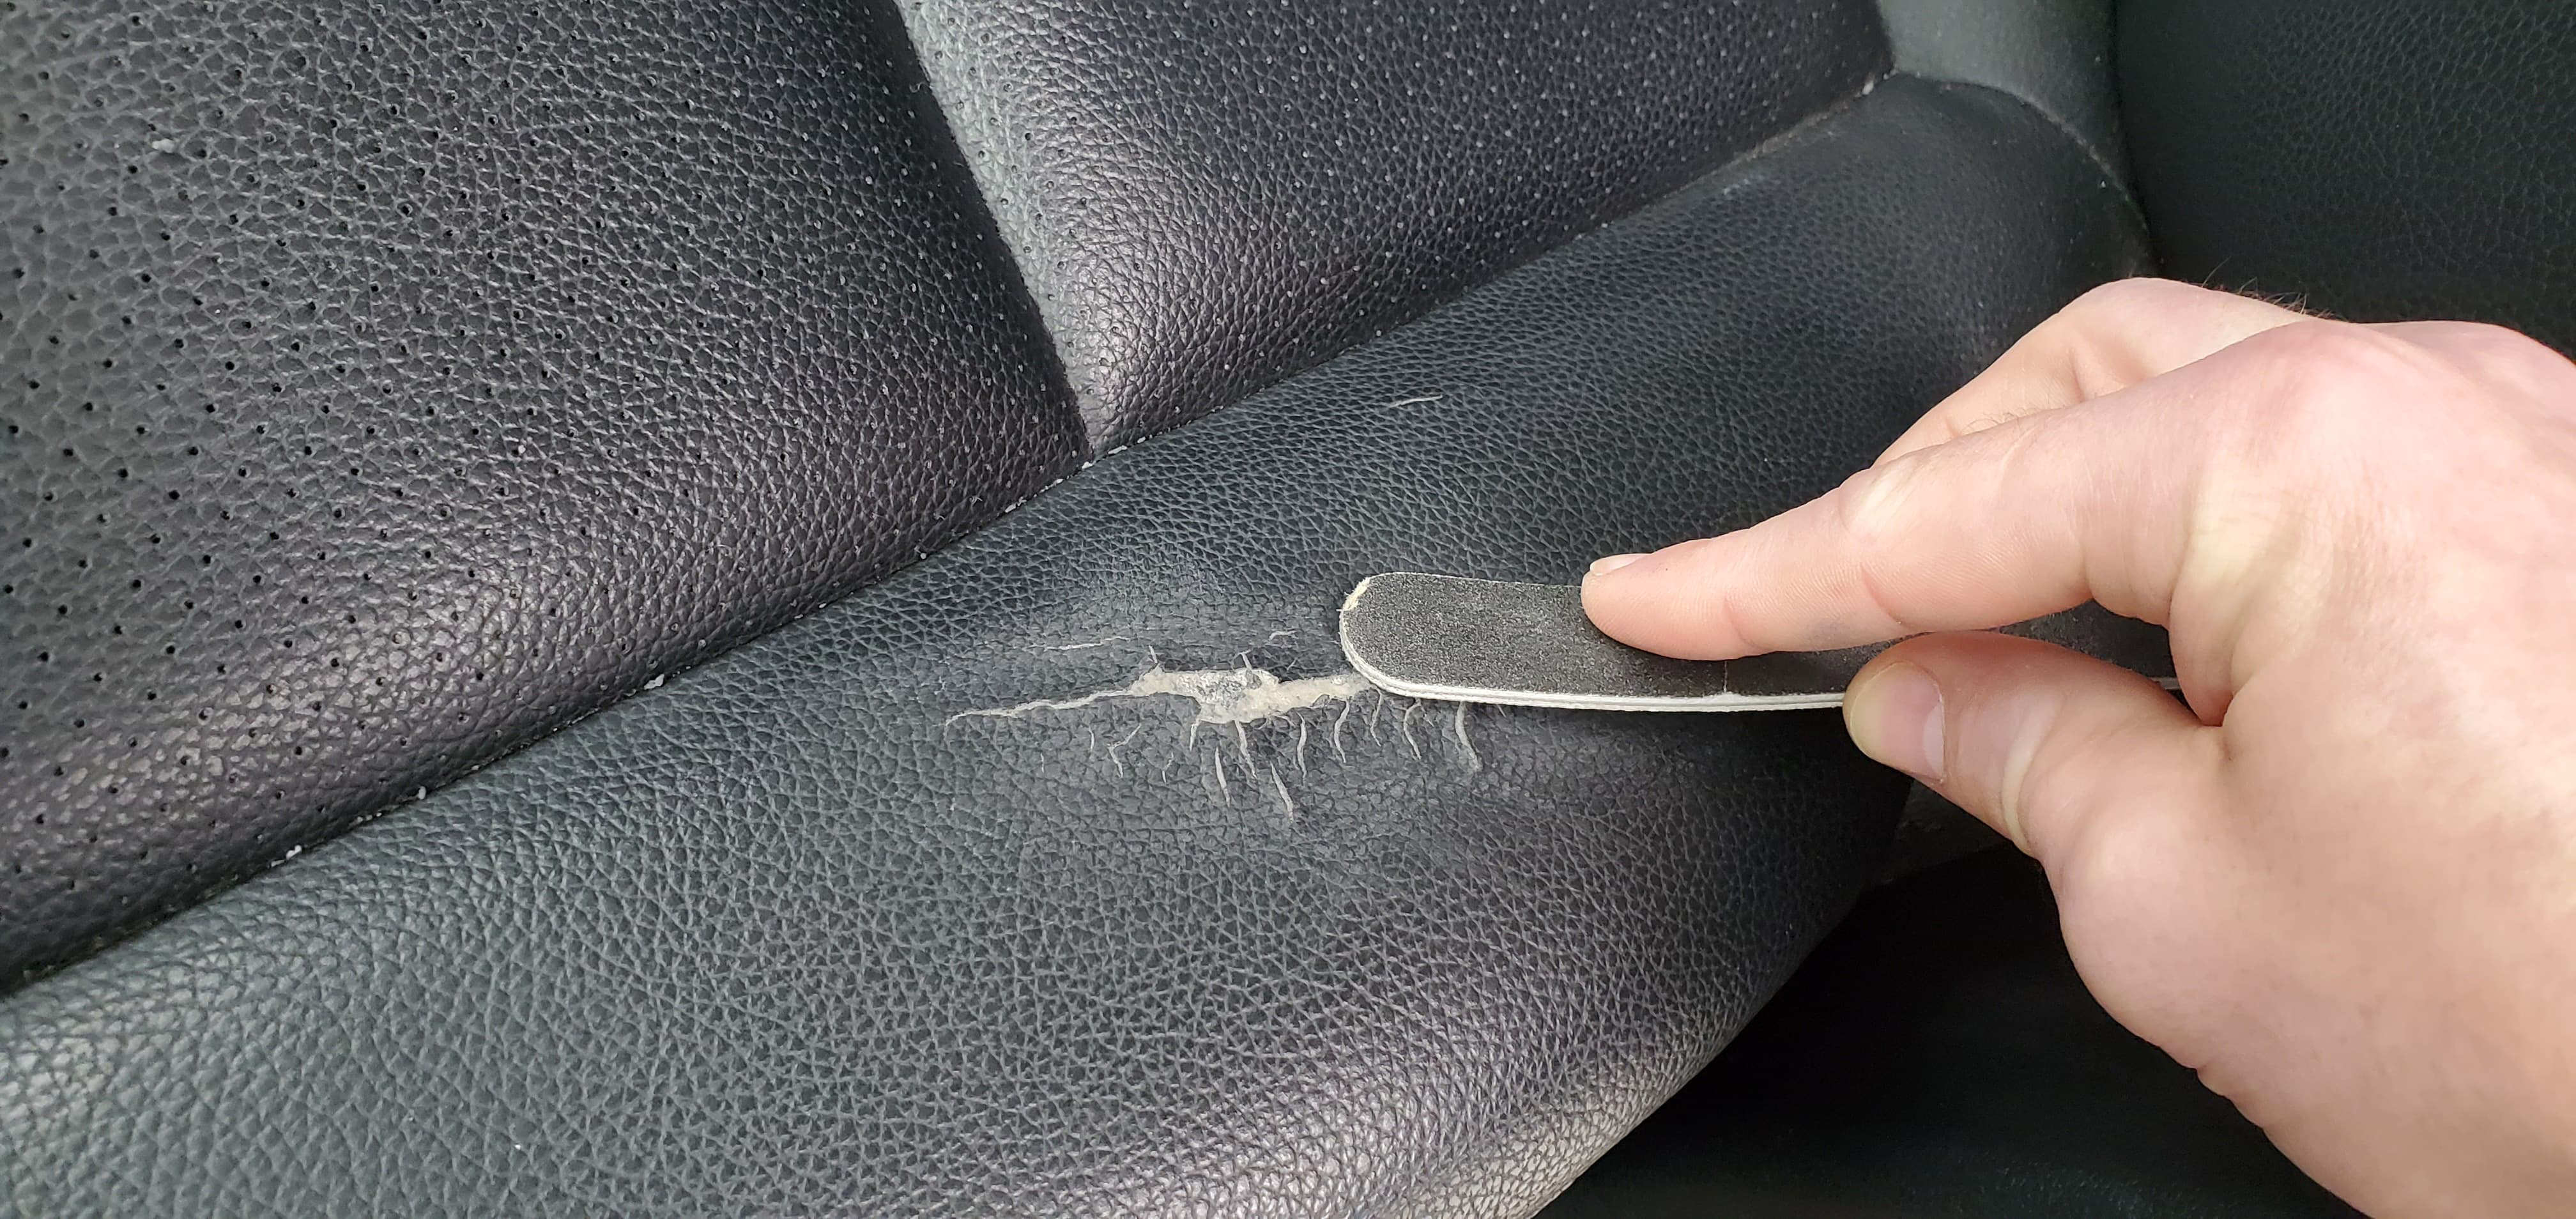 How To Fix Torn Leather How To Repair A Leather Car Seat